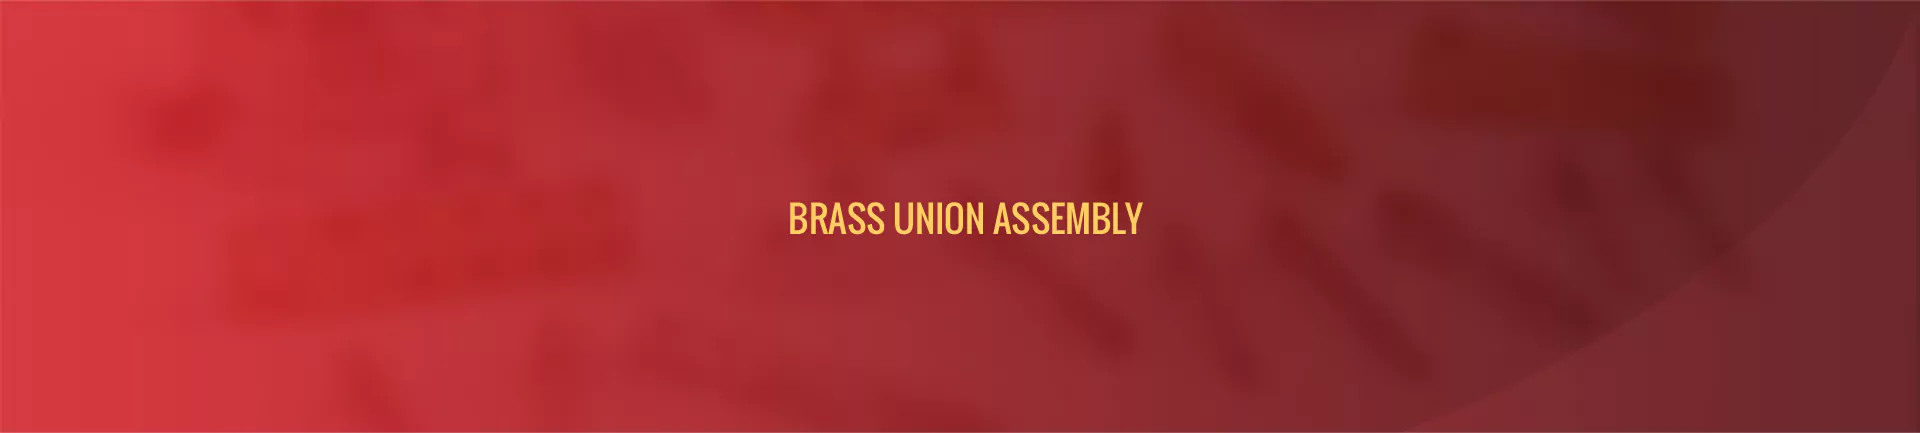 brass_union_assembly-banner